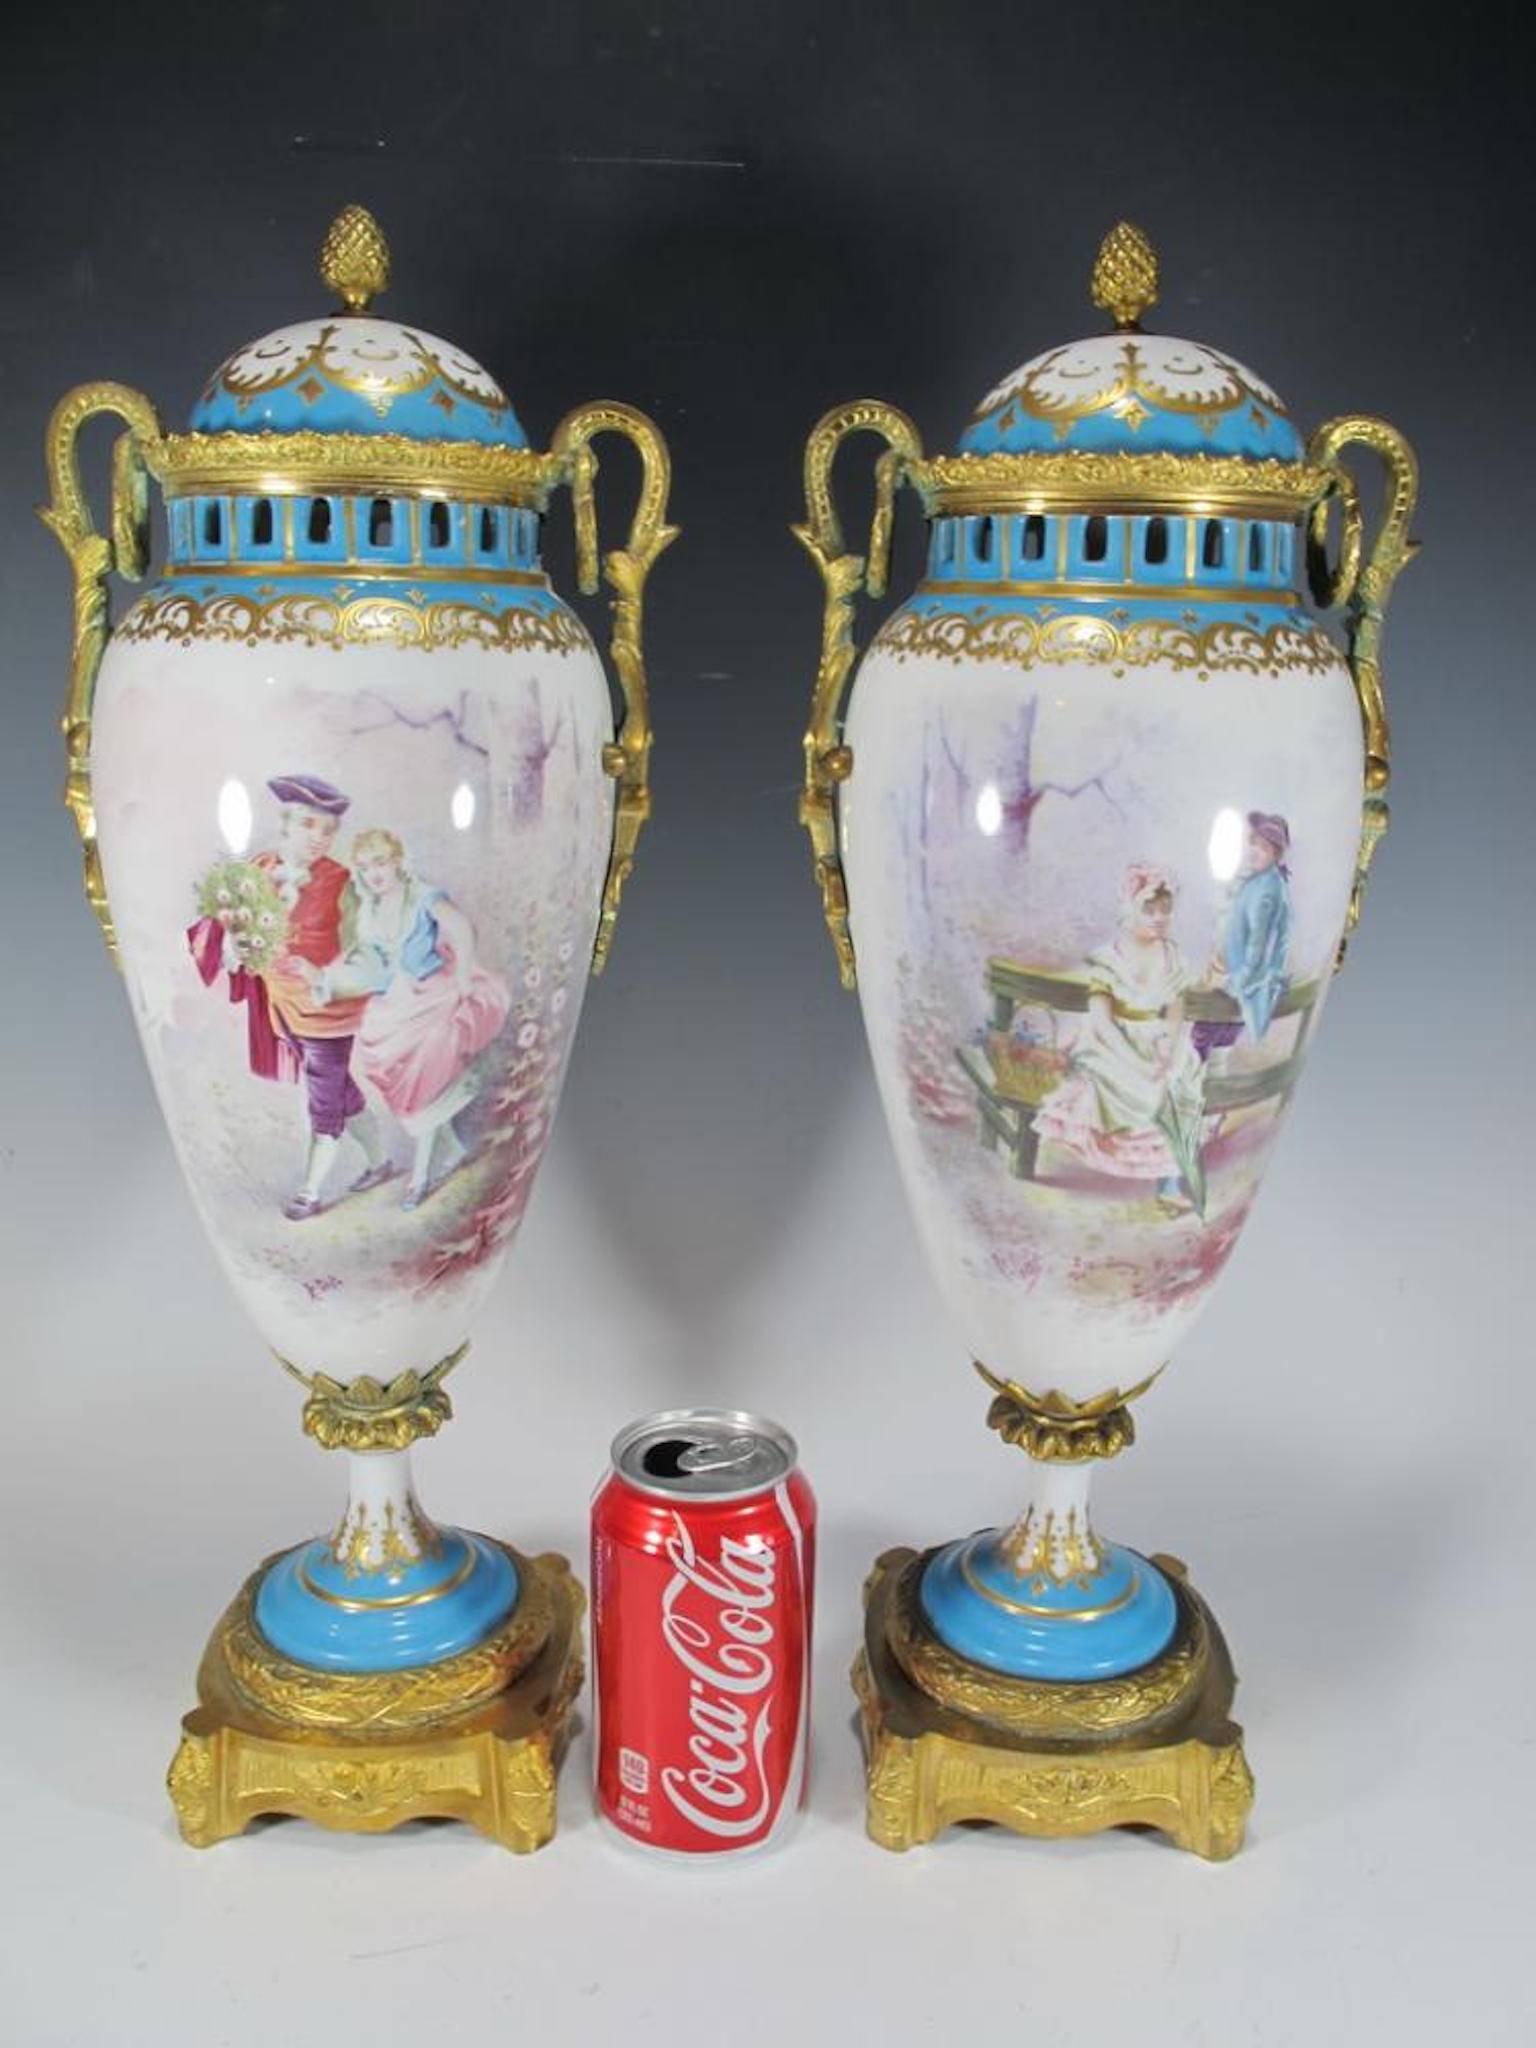 Antique French sevres pair of bronze and porcelain urns. Measures: 18 1/2 H.

Sèvres porcelain, French hard-paste, or true, porcelain as well as soft-paste porcelain (a porcellaneous material rather than true porcelain) made at the royal factory